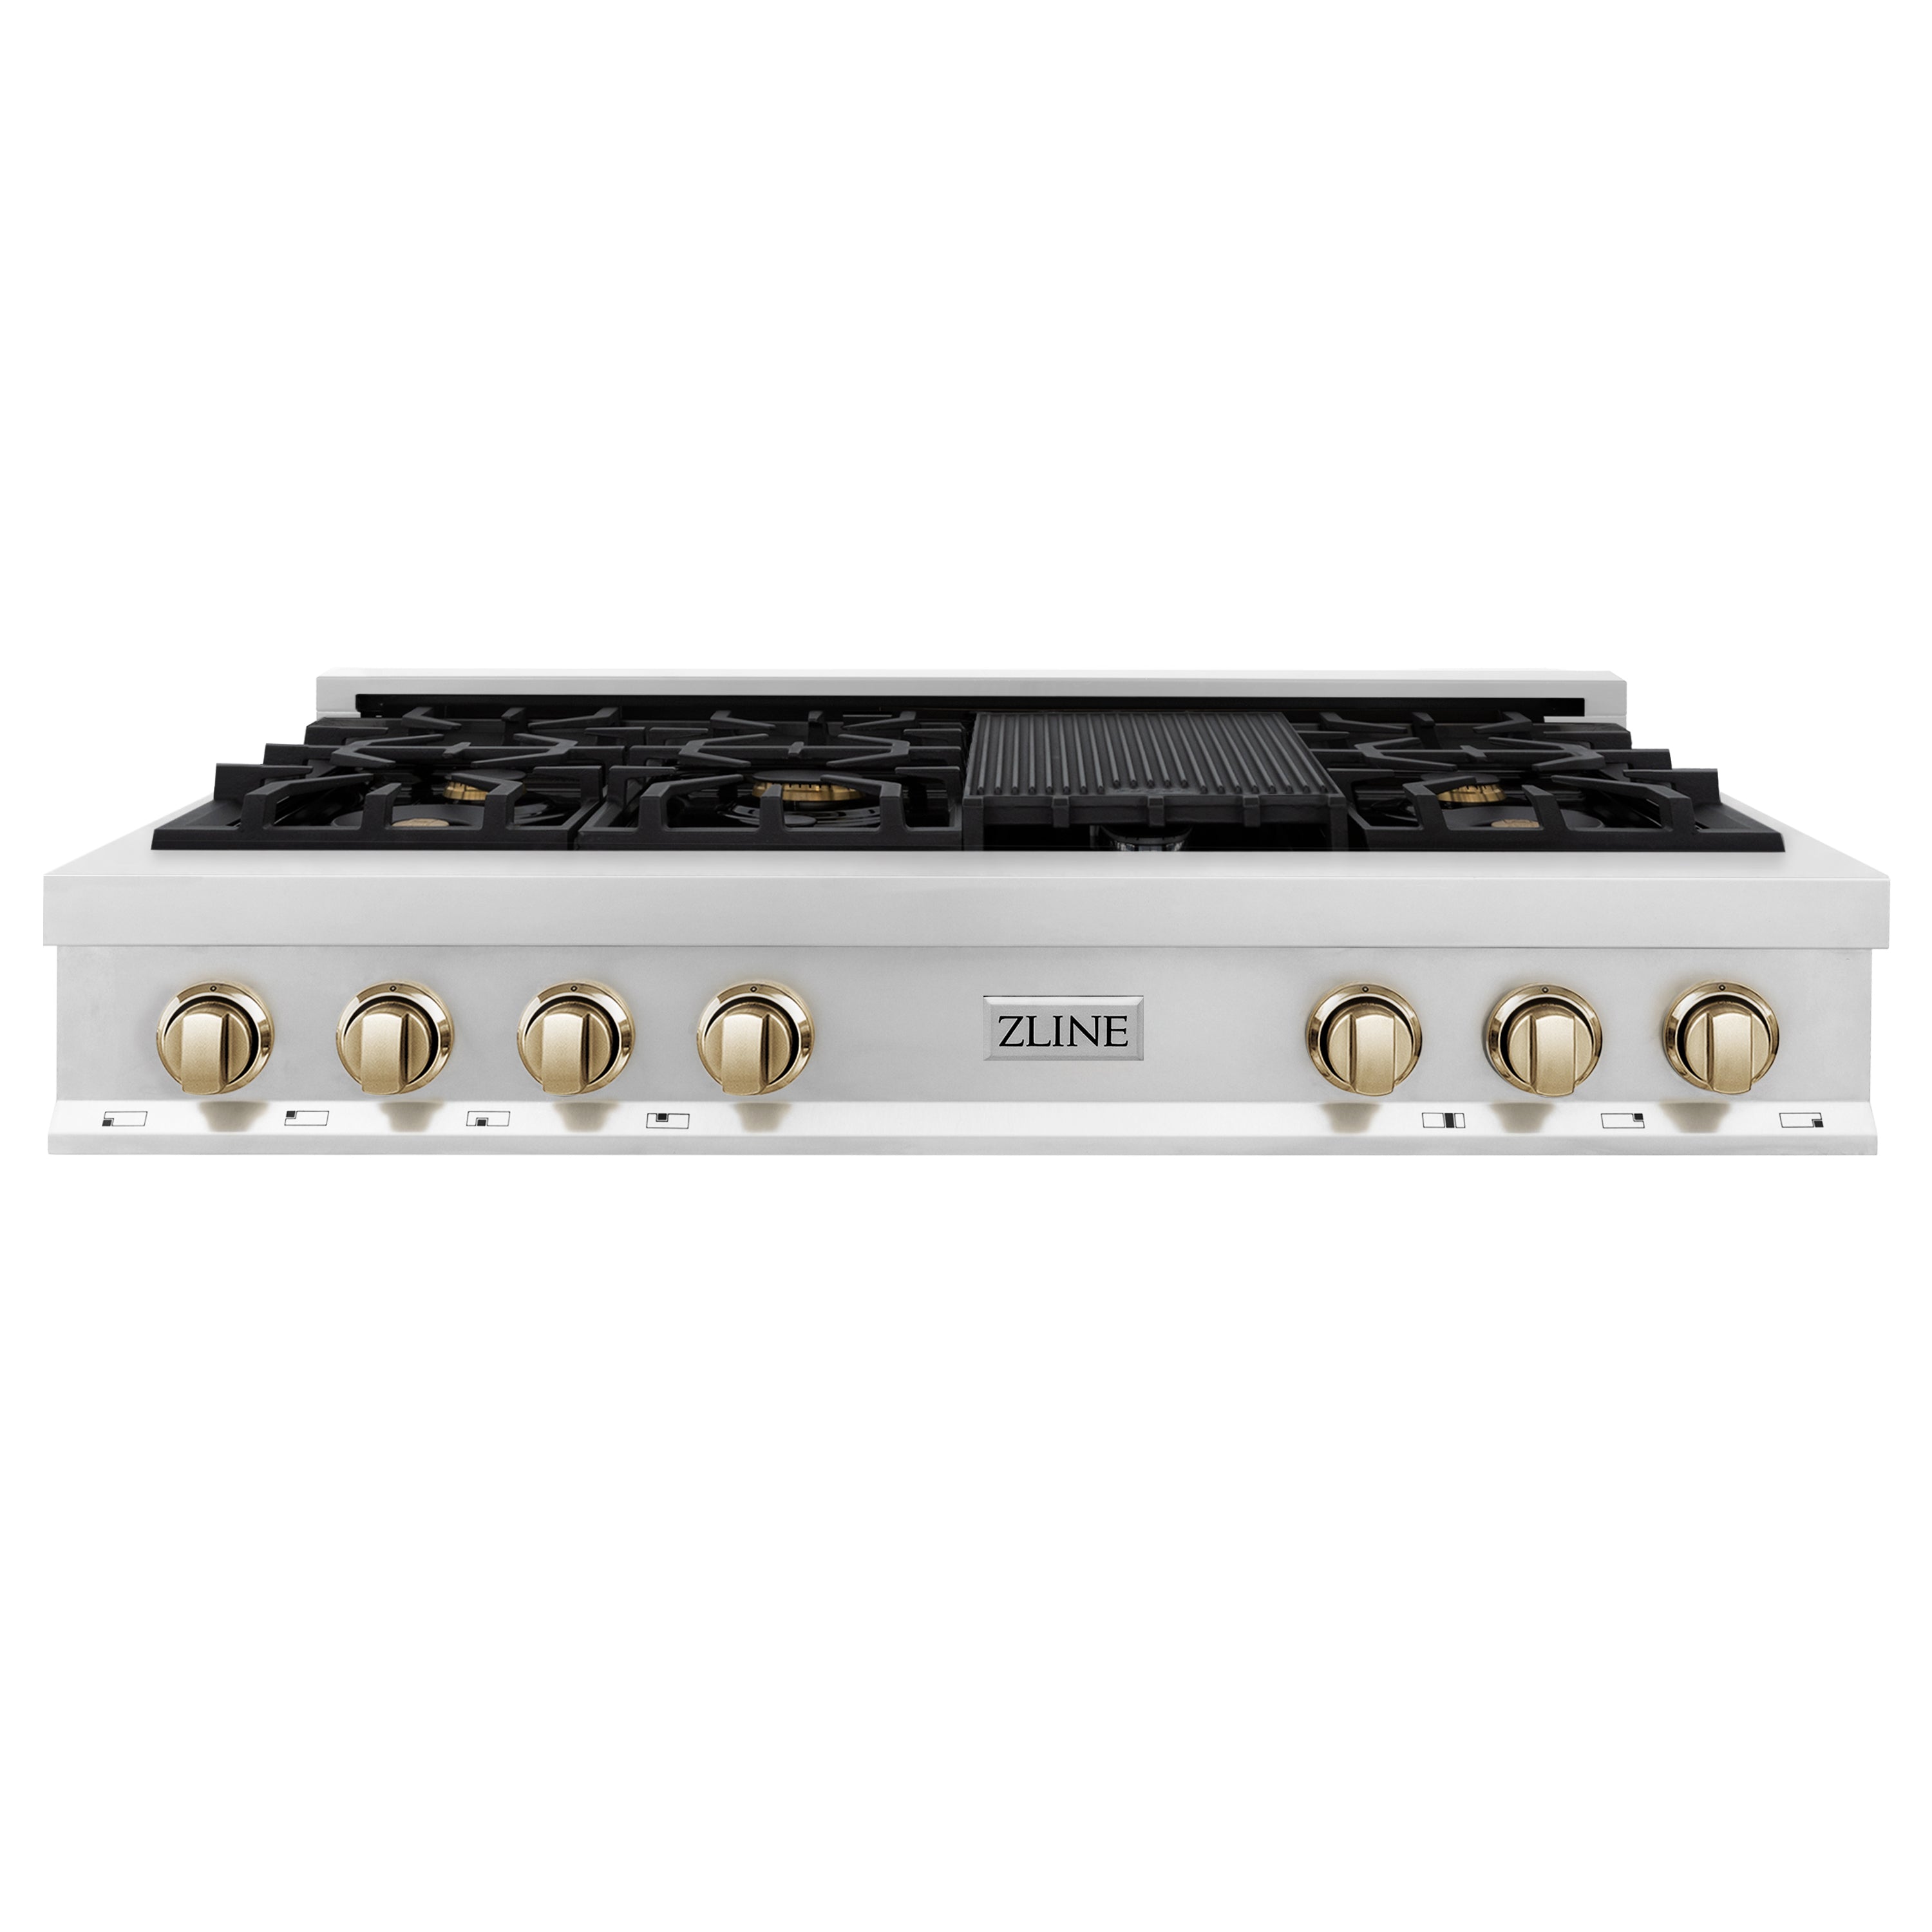 ZLINE Autograph Edition 48" Porcelain Rangetop with 7 Gas Burners in Stainless Steel and Gold Accents (RTZ-48-G)